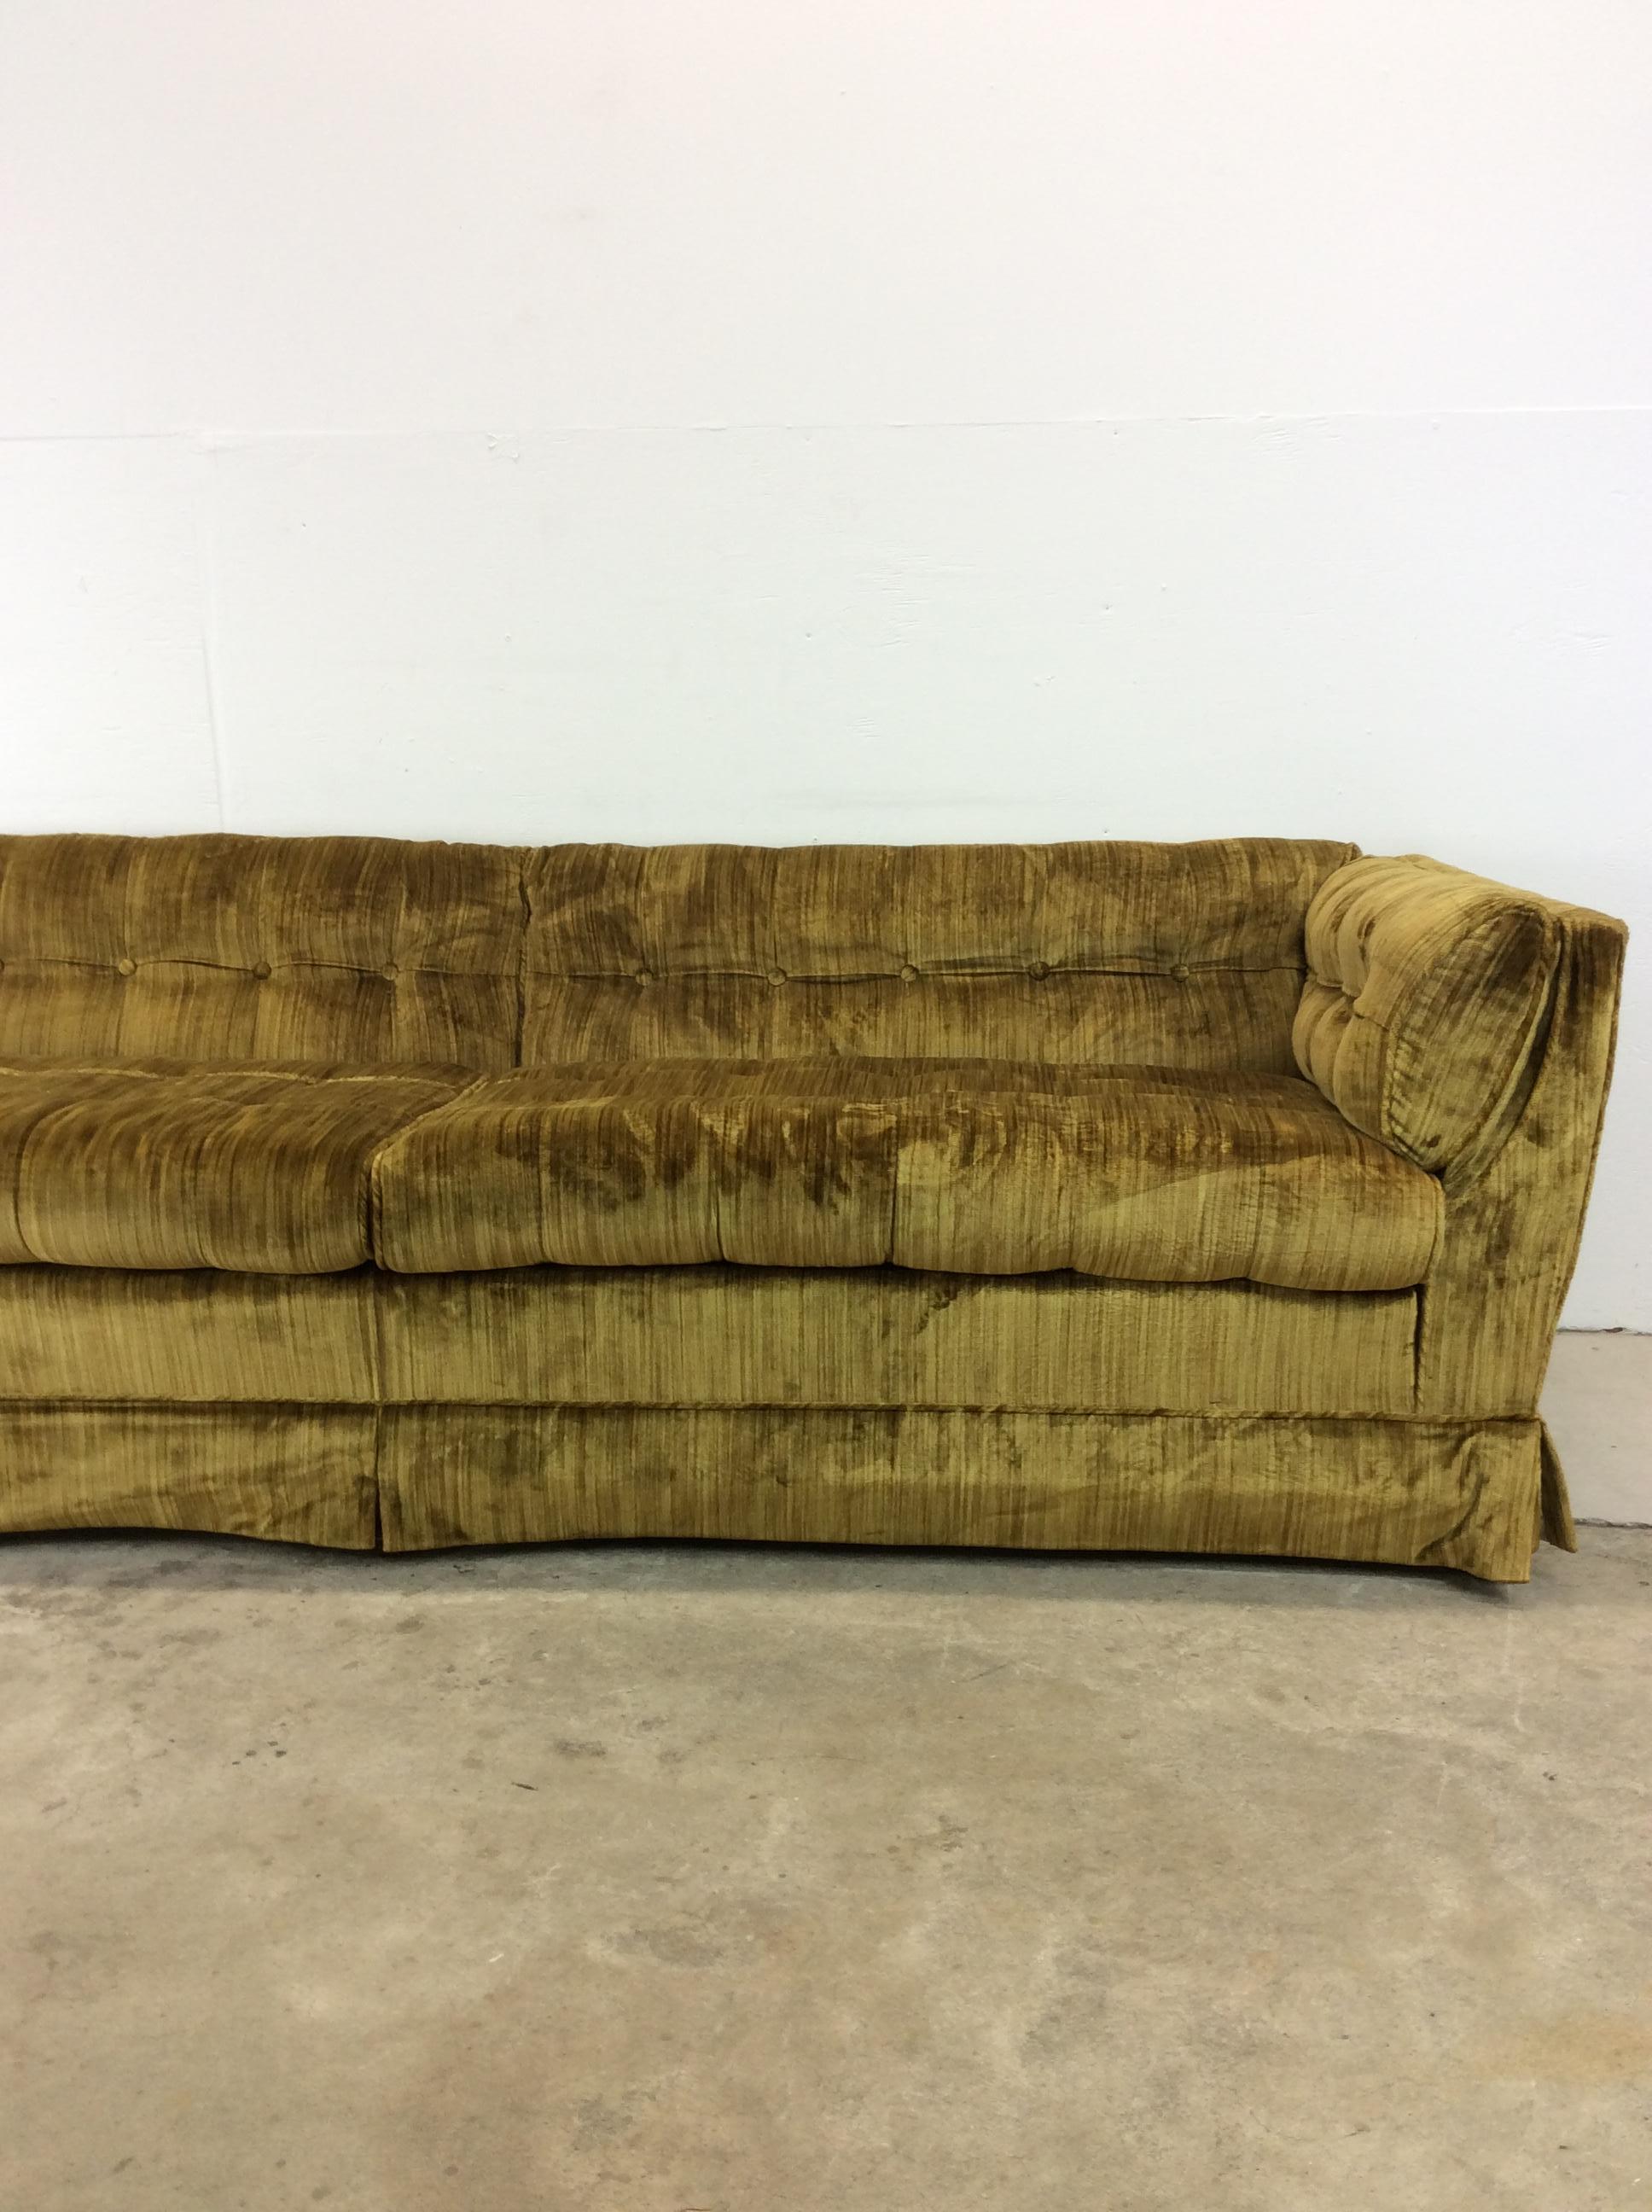 20th Century Mid Century Modern Long Sofa with Green Tufted Upholstery For Sale